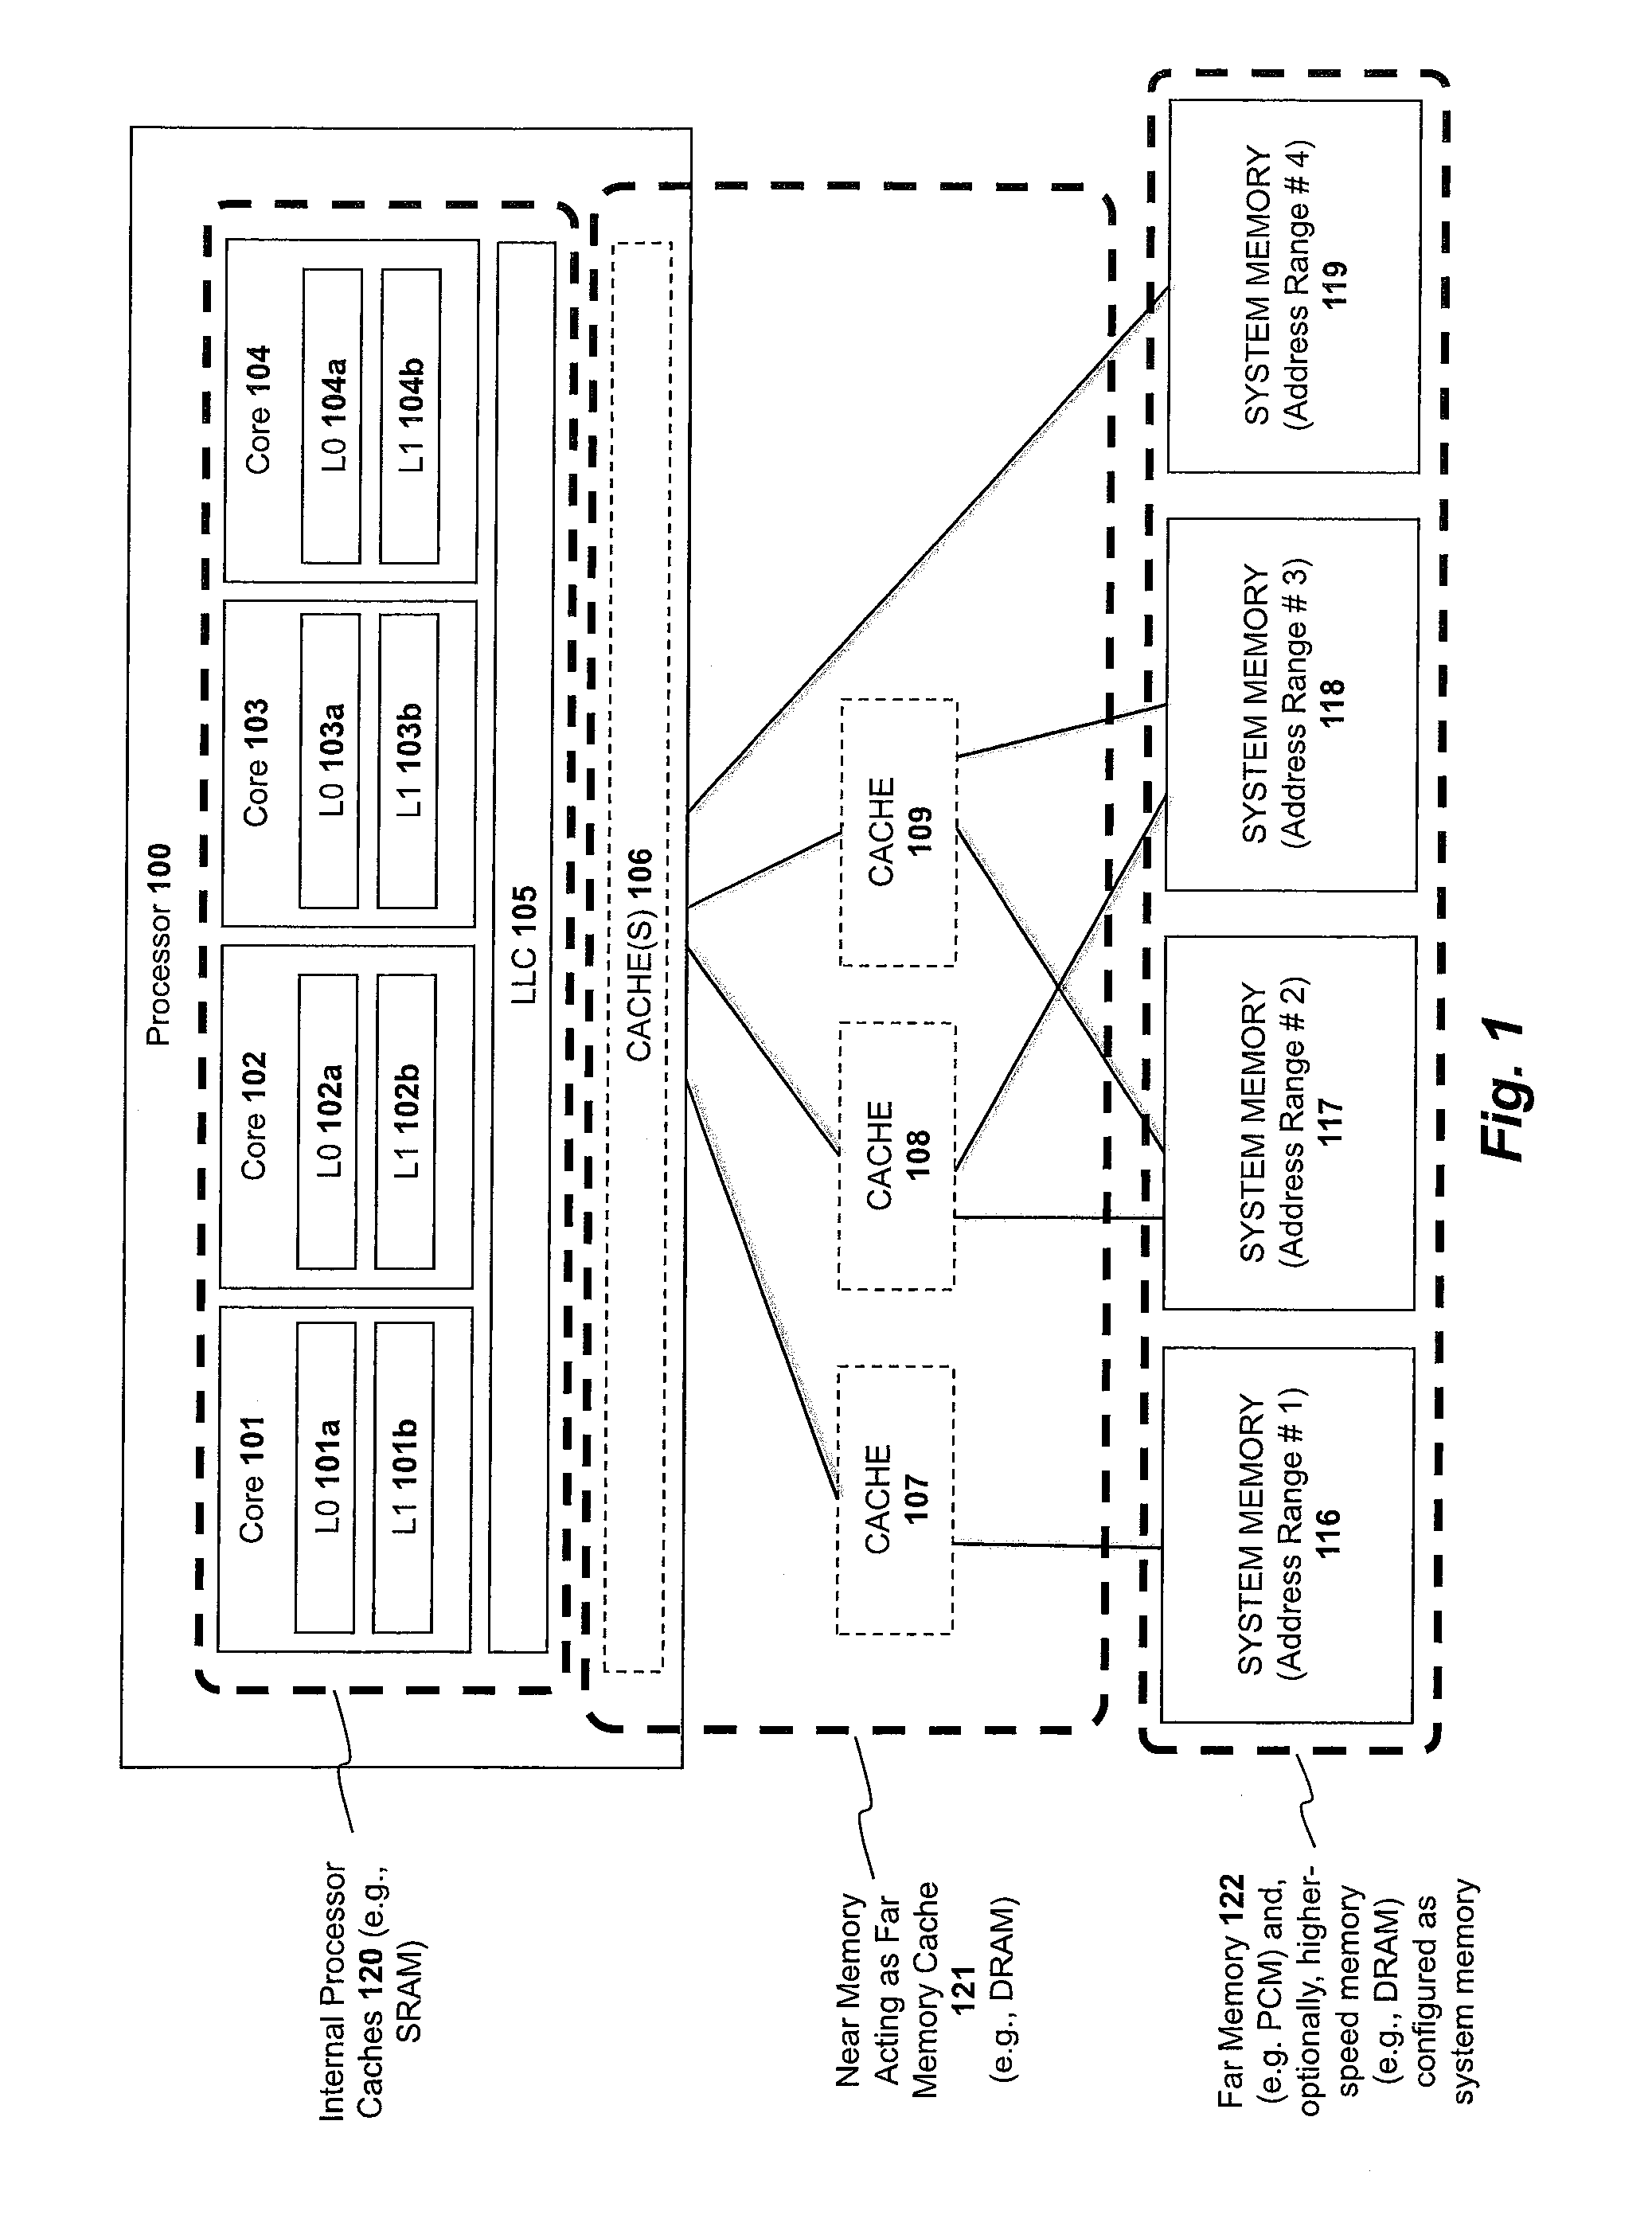 Apparatus and method for implementing a multi-level memory hierarchy over common memory channels